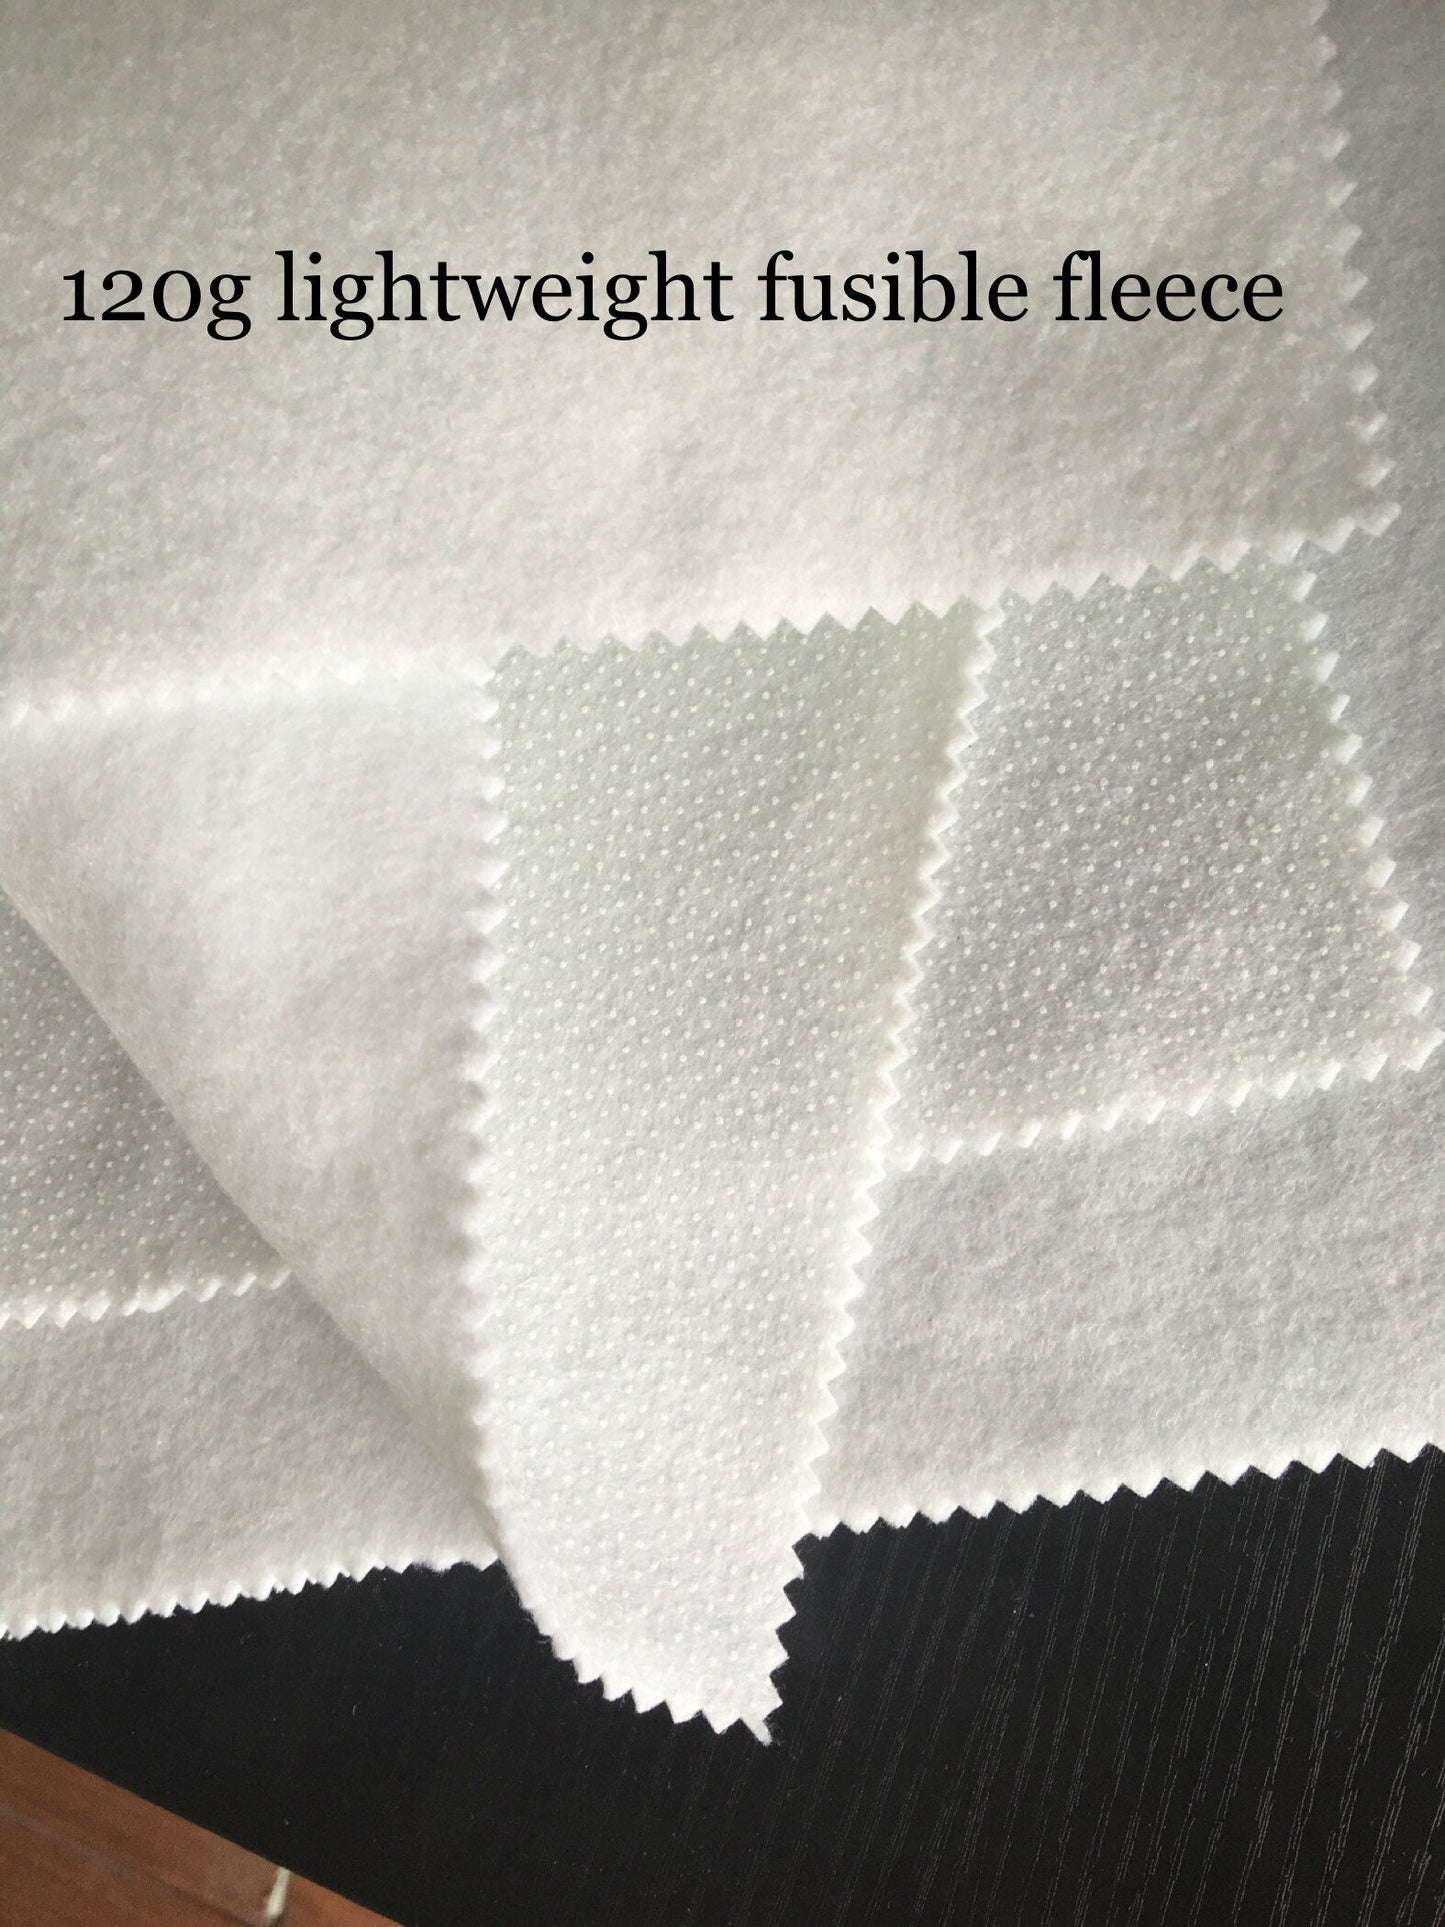 Fusible fleece stabilizer, iron on lightweight fleece, medium weight fusible fleece for bags, clothes, quilts, table runners, coasters etc